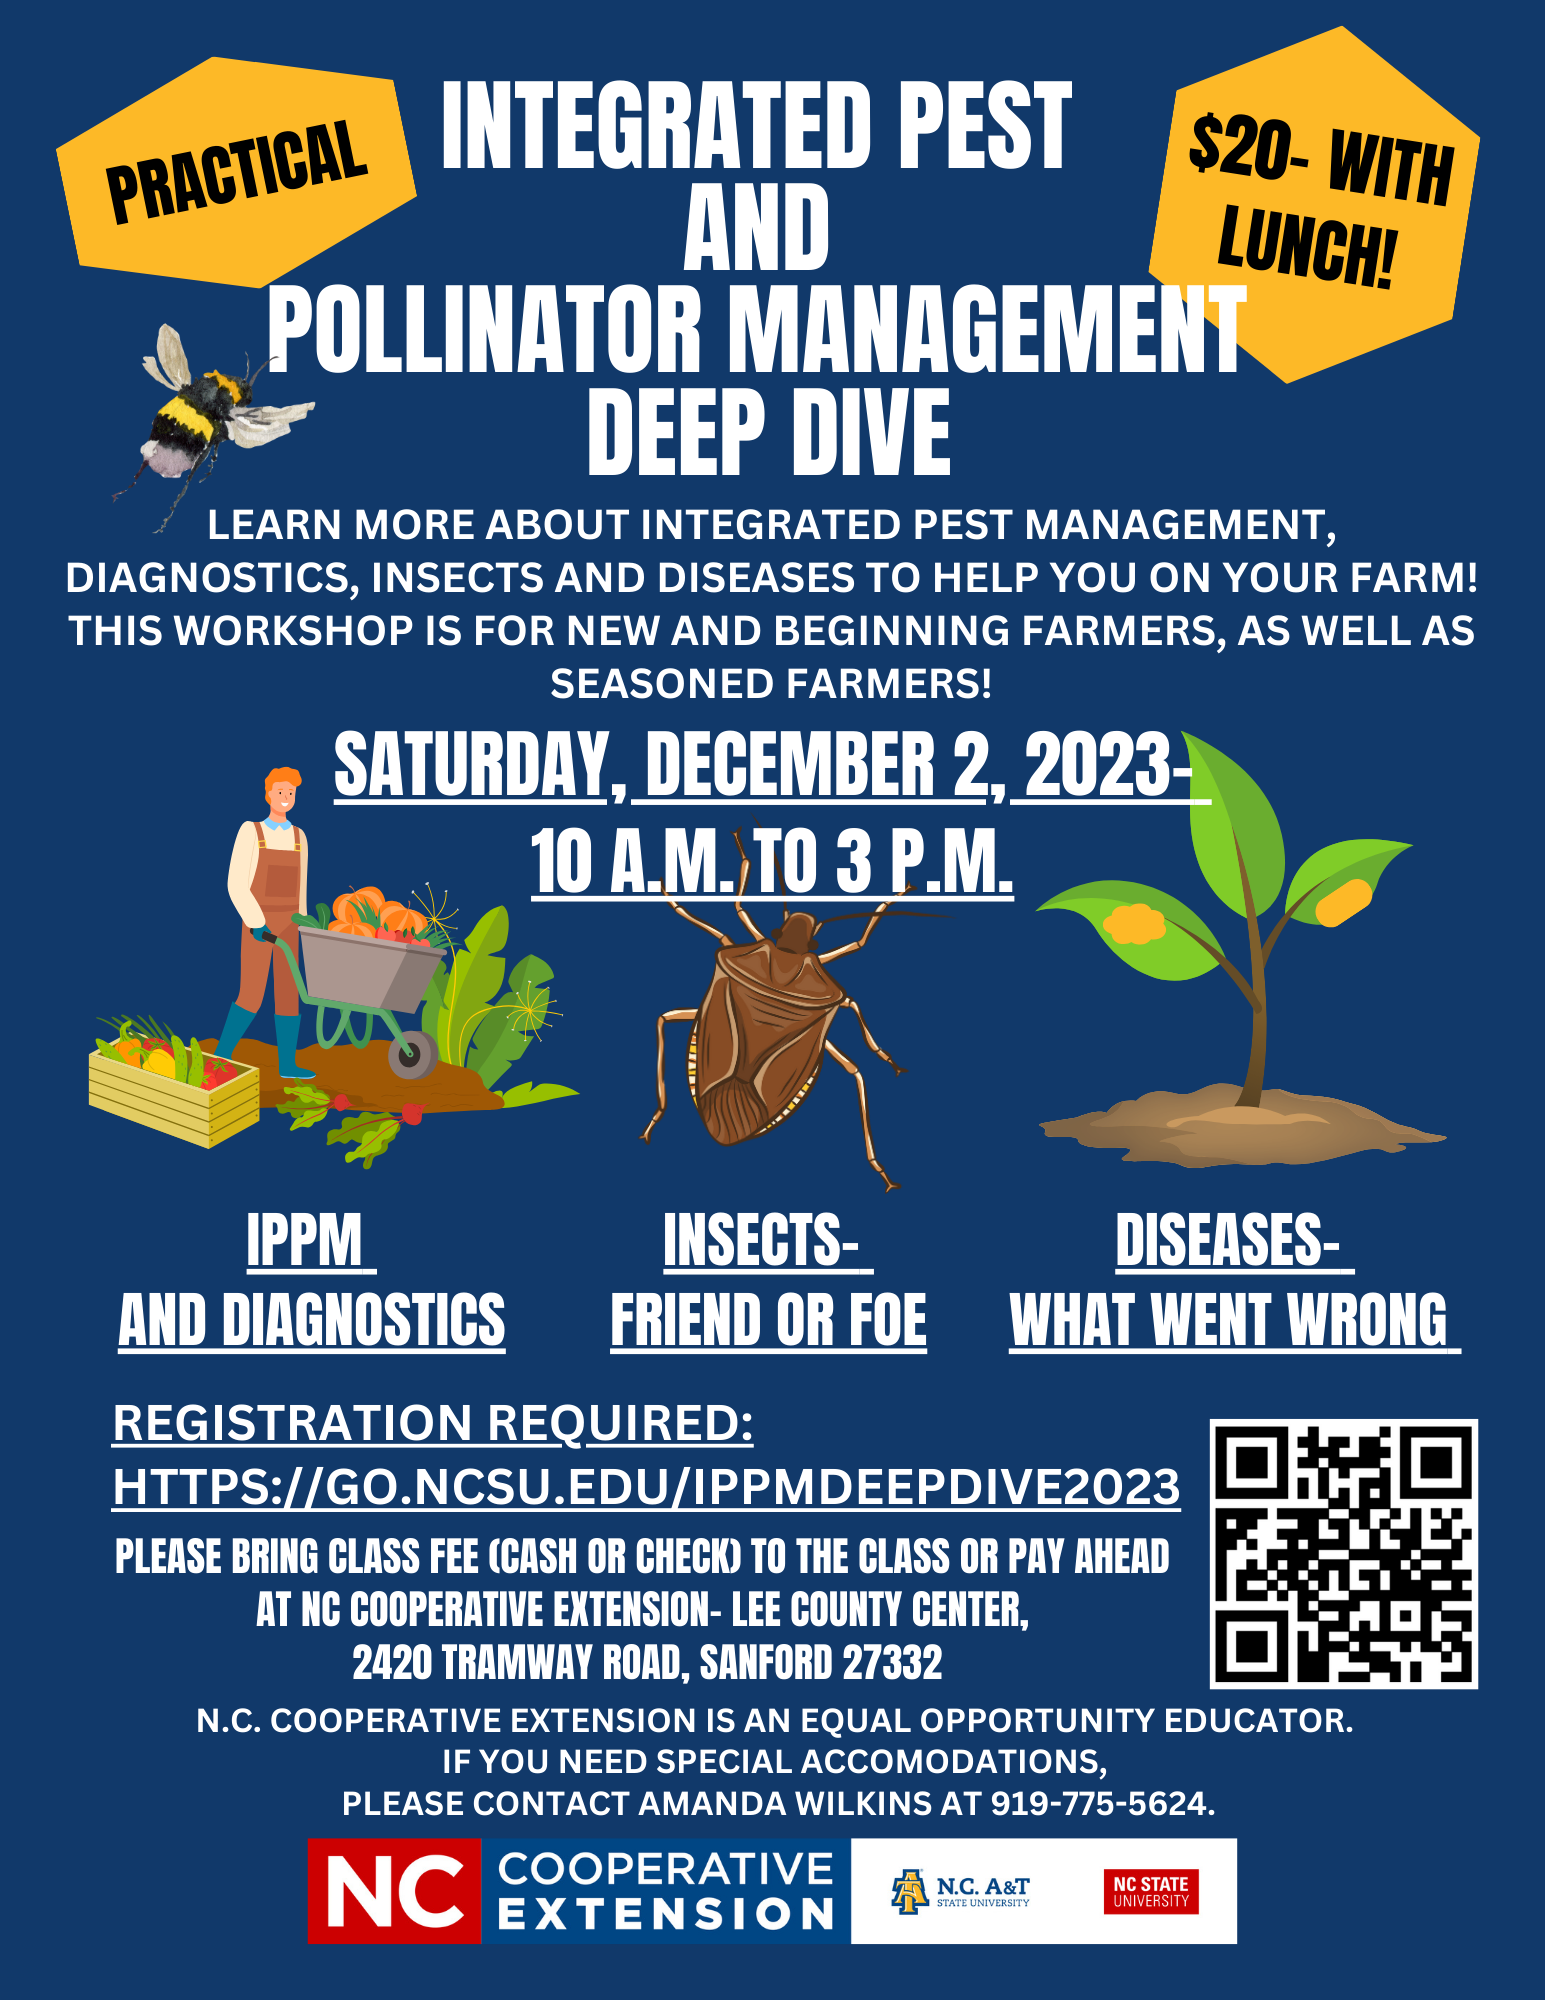 Learn more about integrated pest management, diagnostics, insects and diseases to help you on your farm! This workshop is for new and beginning farmers as well as seasoned farmers to gain skills and knowledge in managing disease and pest pressure on their farms and leveraging the whole IPPM toolbox of management techniques to achieve better control in their production systems. 